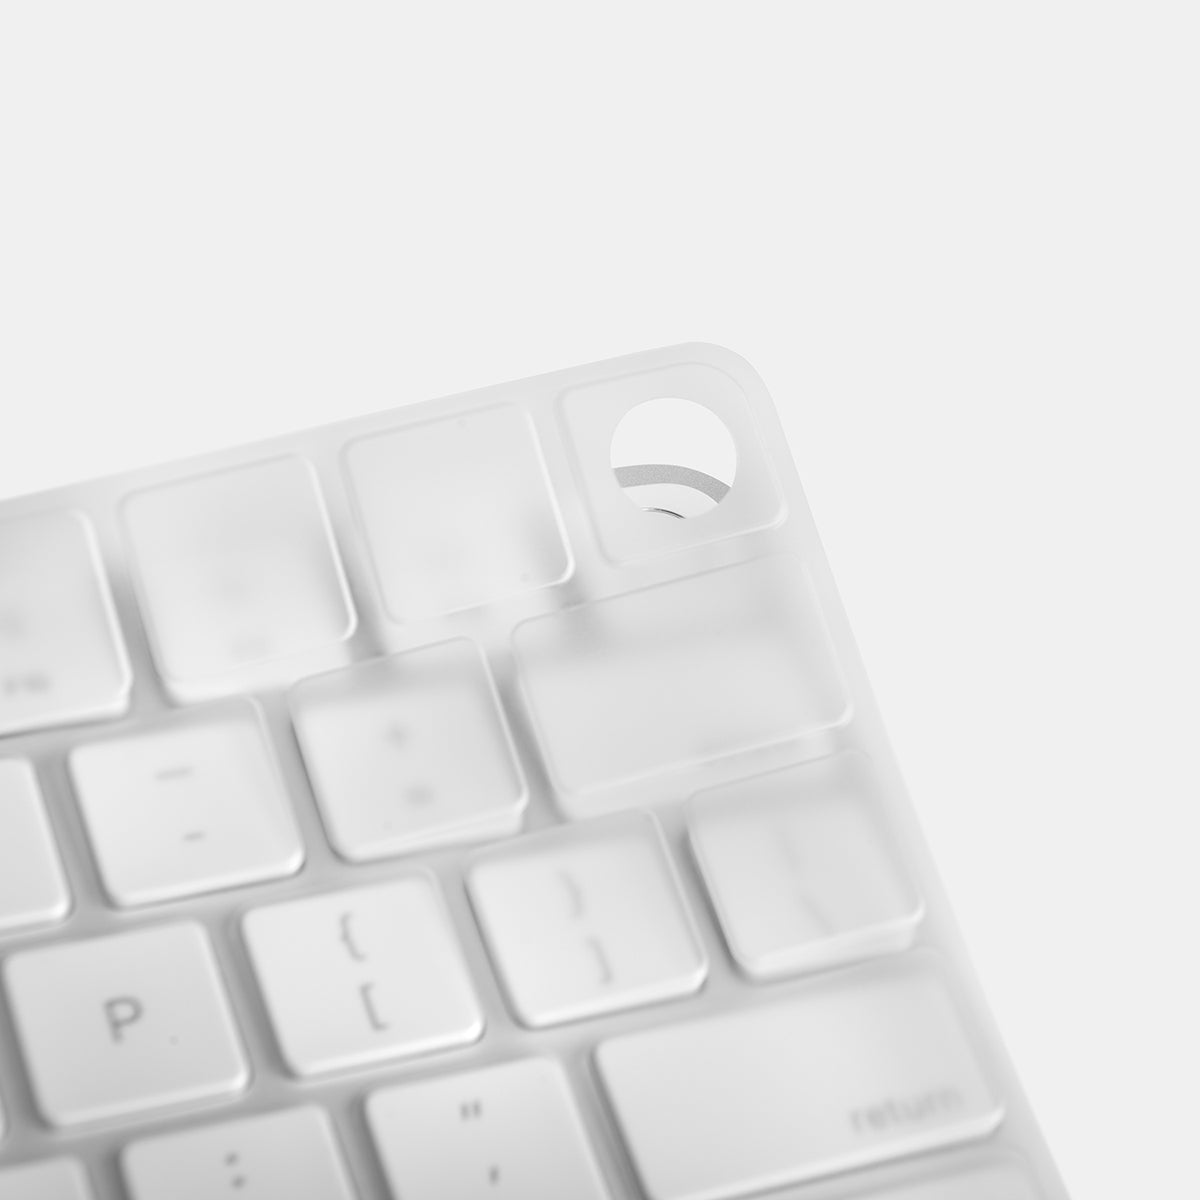 Magic Keyboard with Touch ID for Mac models with Apple silicon - French